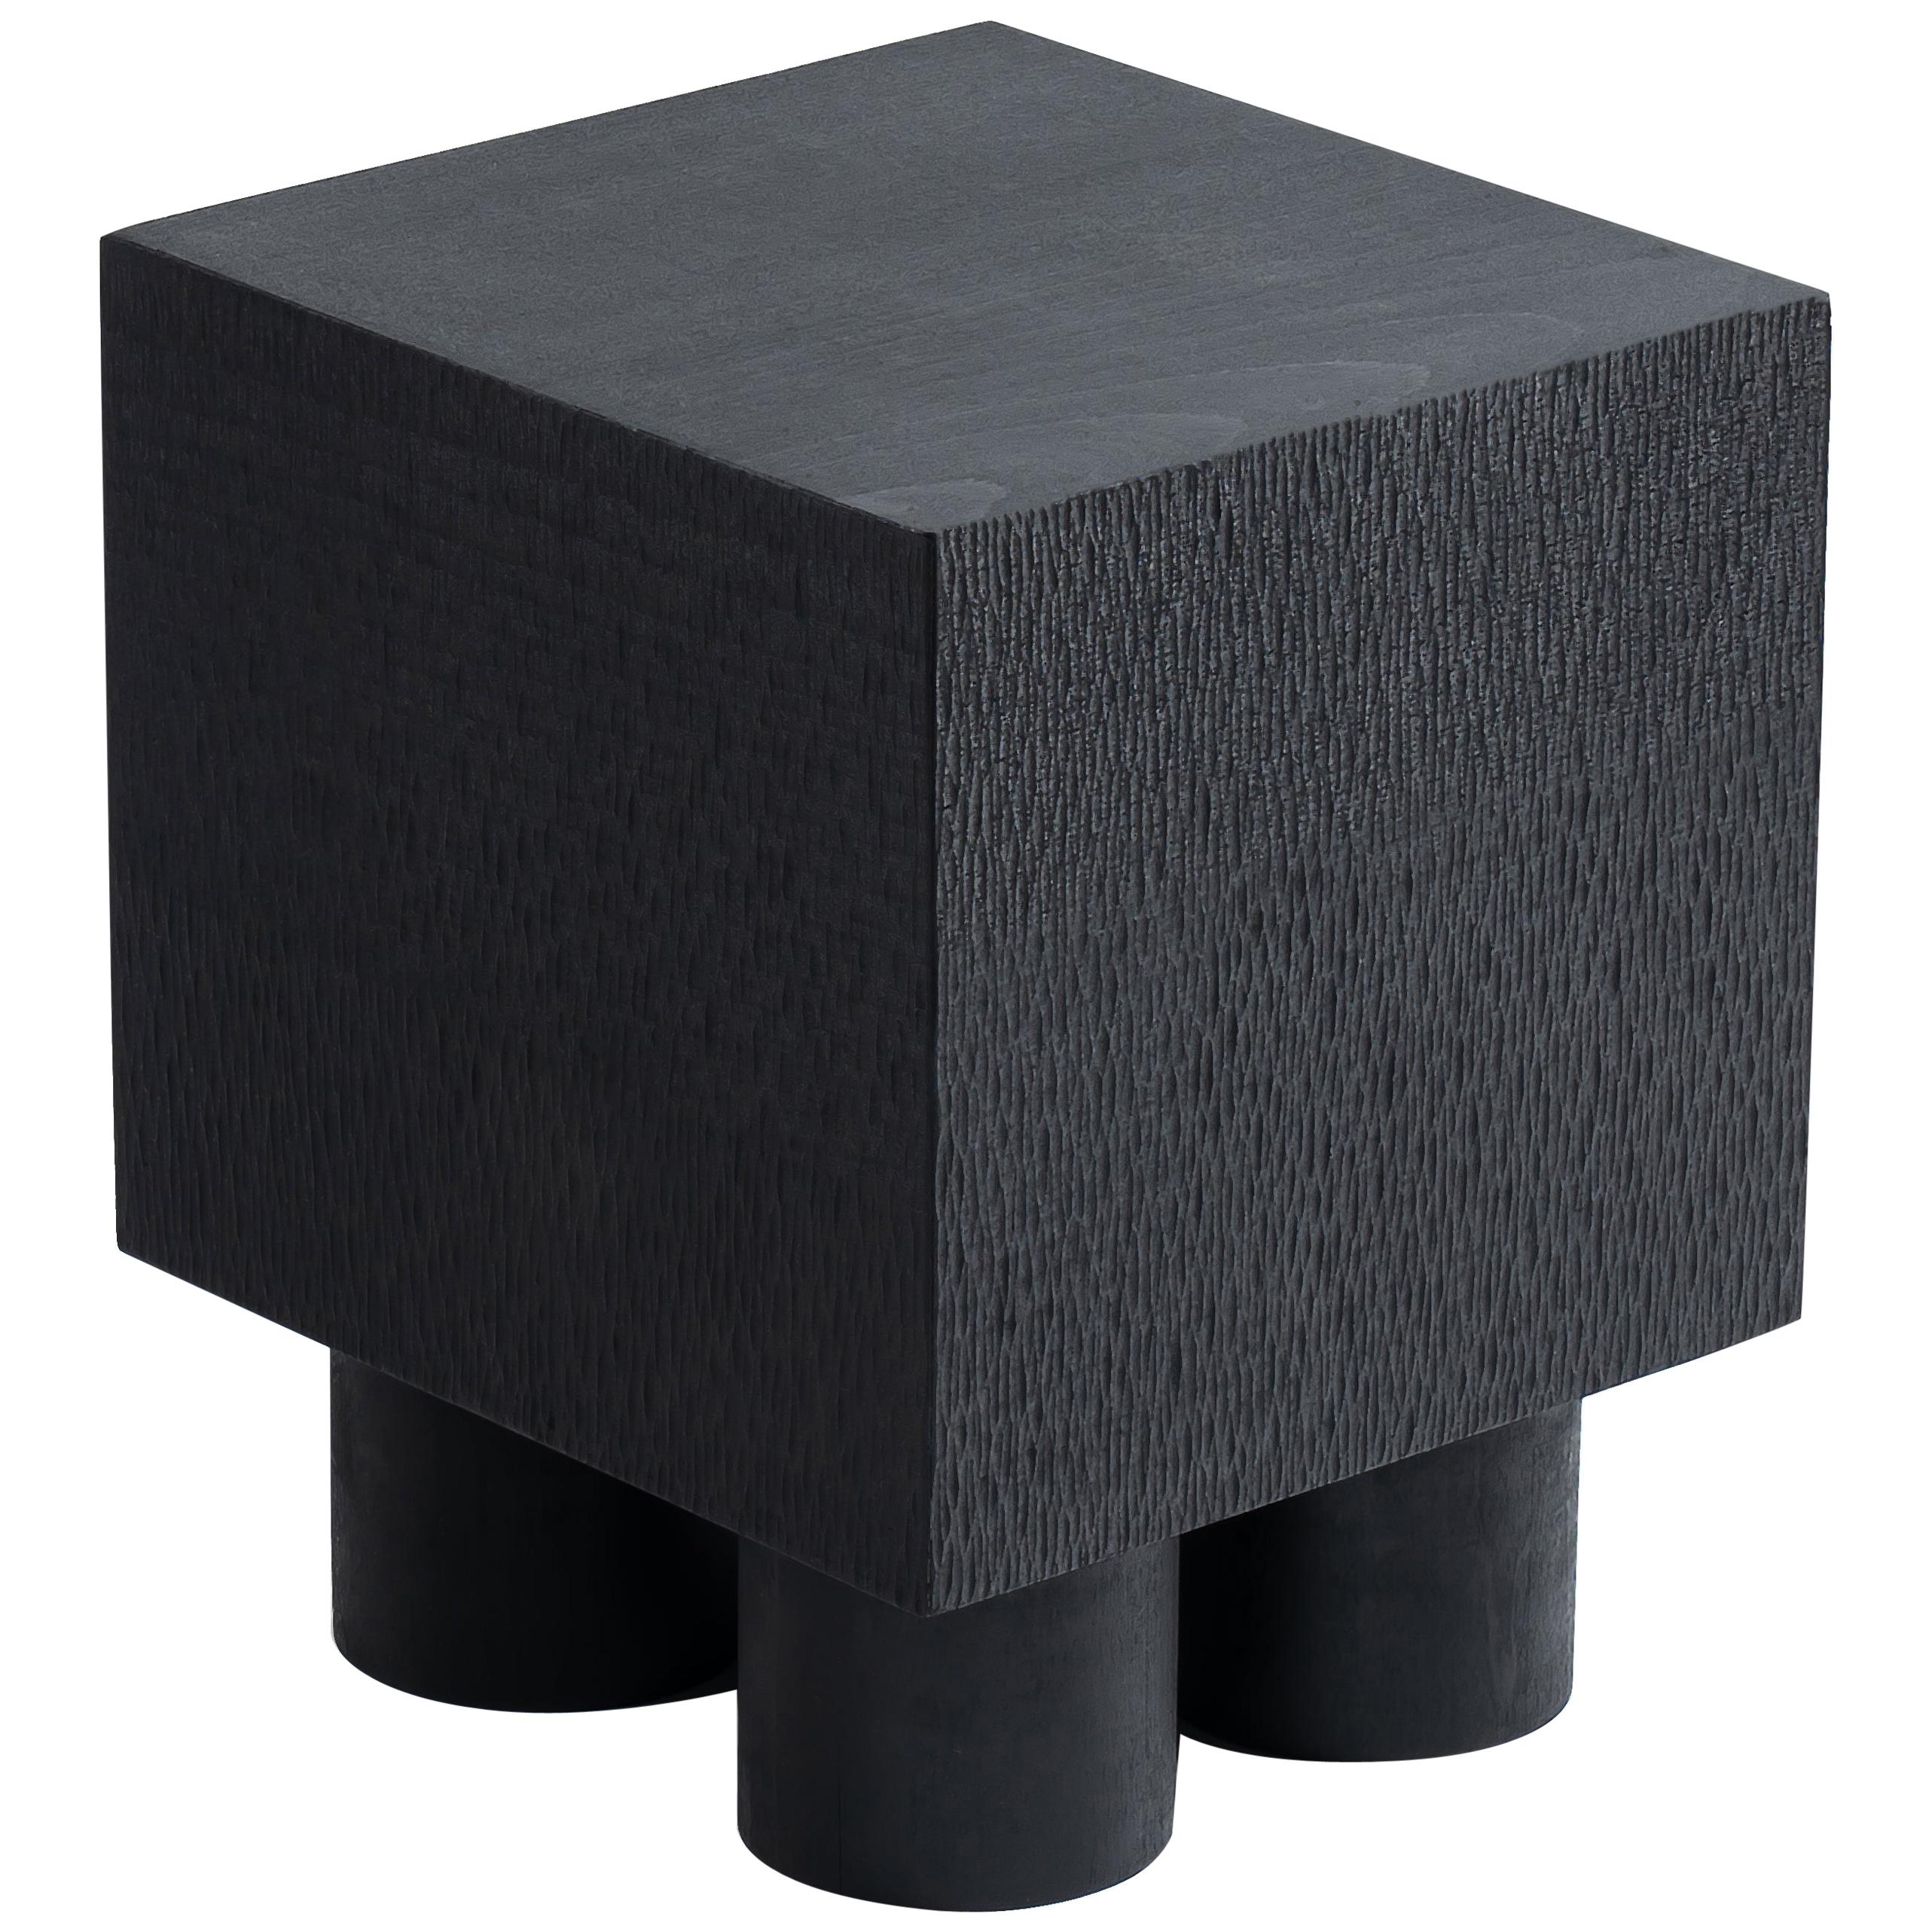 Time of Action n. 20-1 Contemporary Side Table in Wood